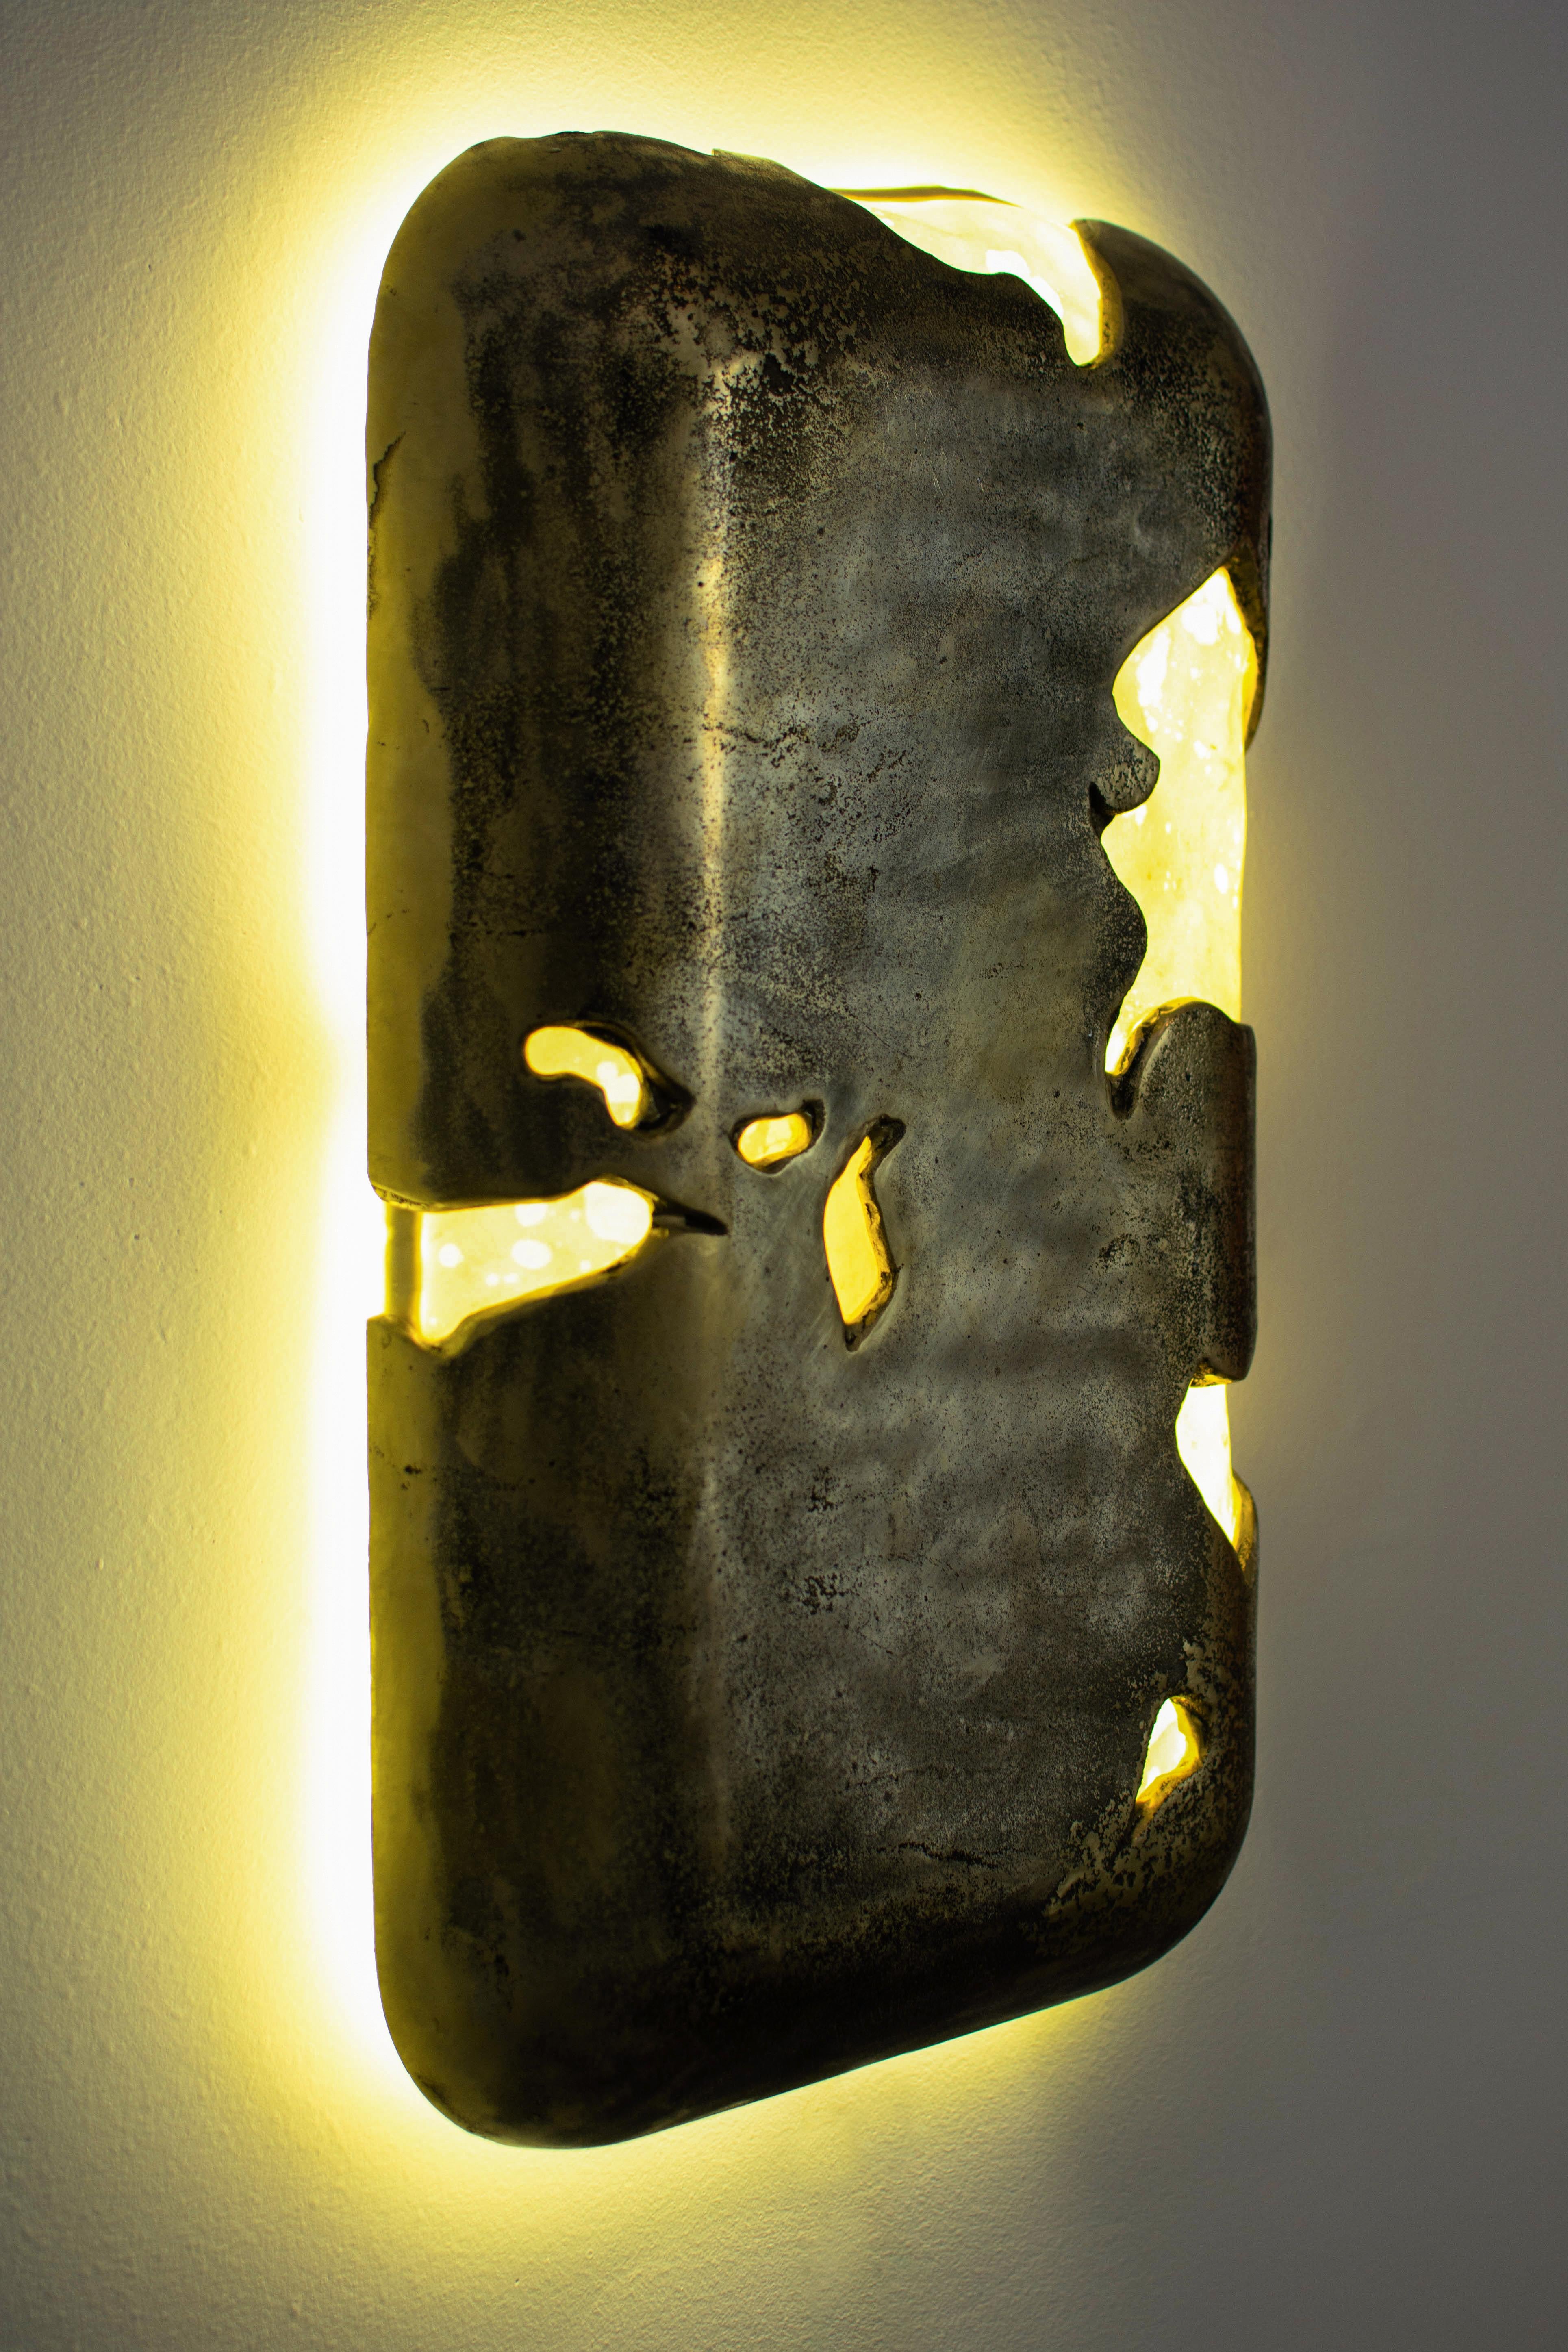 WCS2106 is a one-of-a-kind work of art and functional sconce made from cast bronze, Argentine goatskin and LED by artist and designer William C Stuart, founder of Costantini Design. 

Measurements are 12